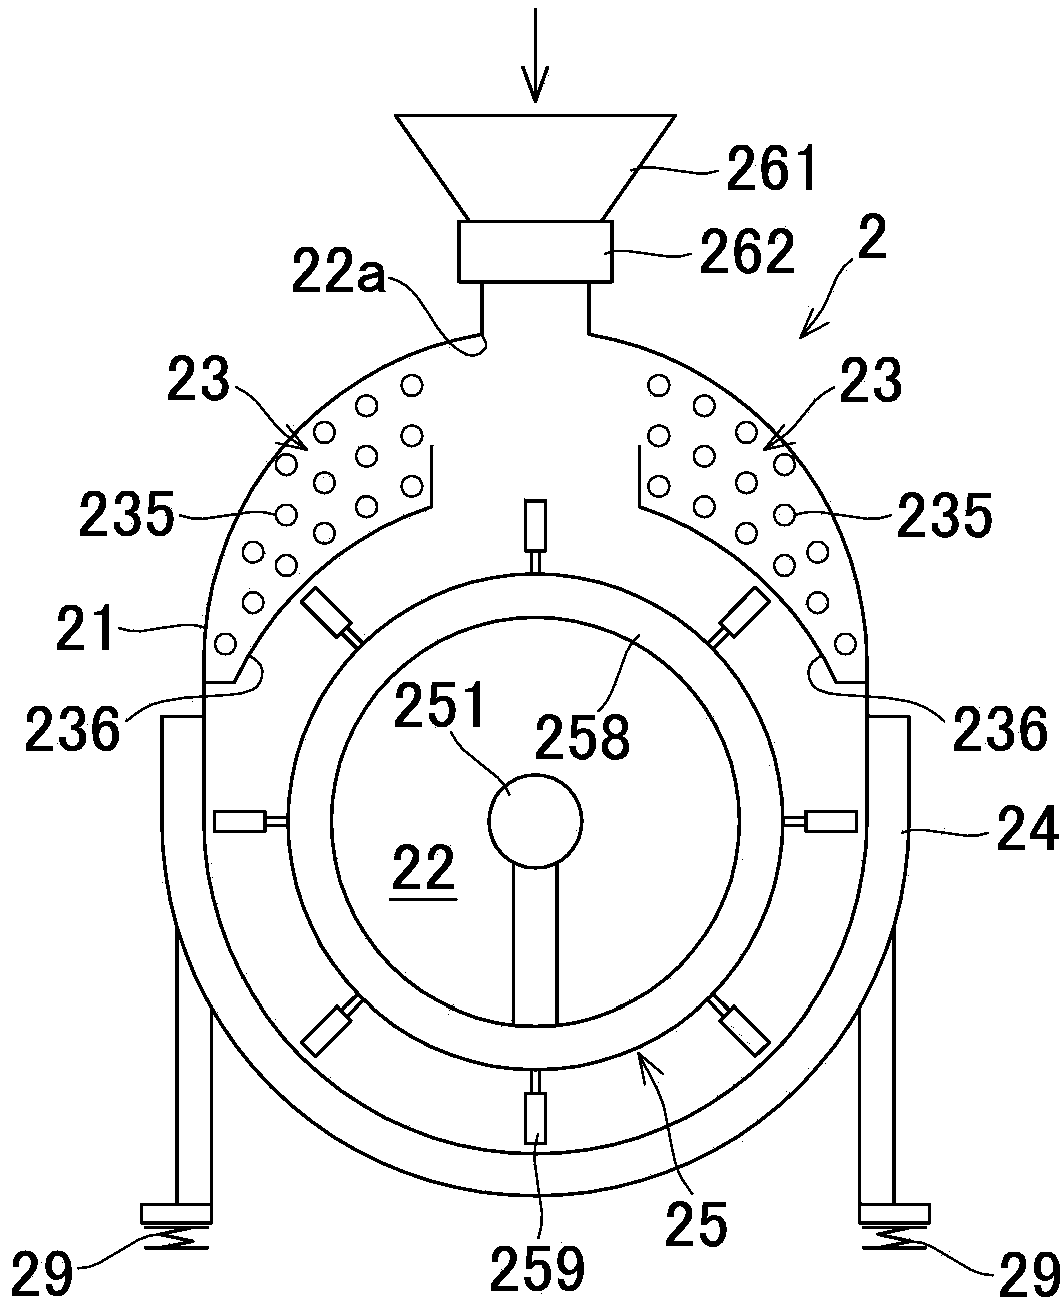 Reduced-pressure fermenting and drying apparatus